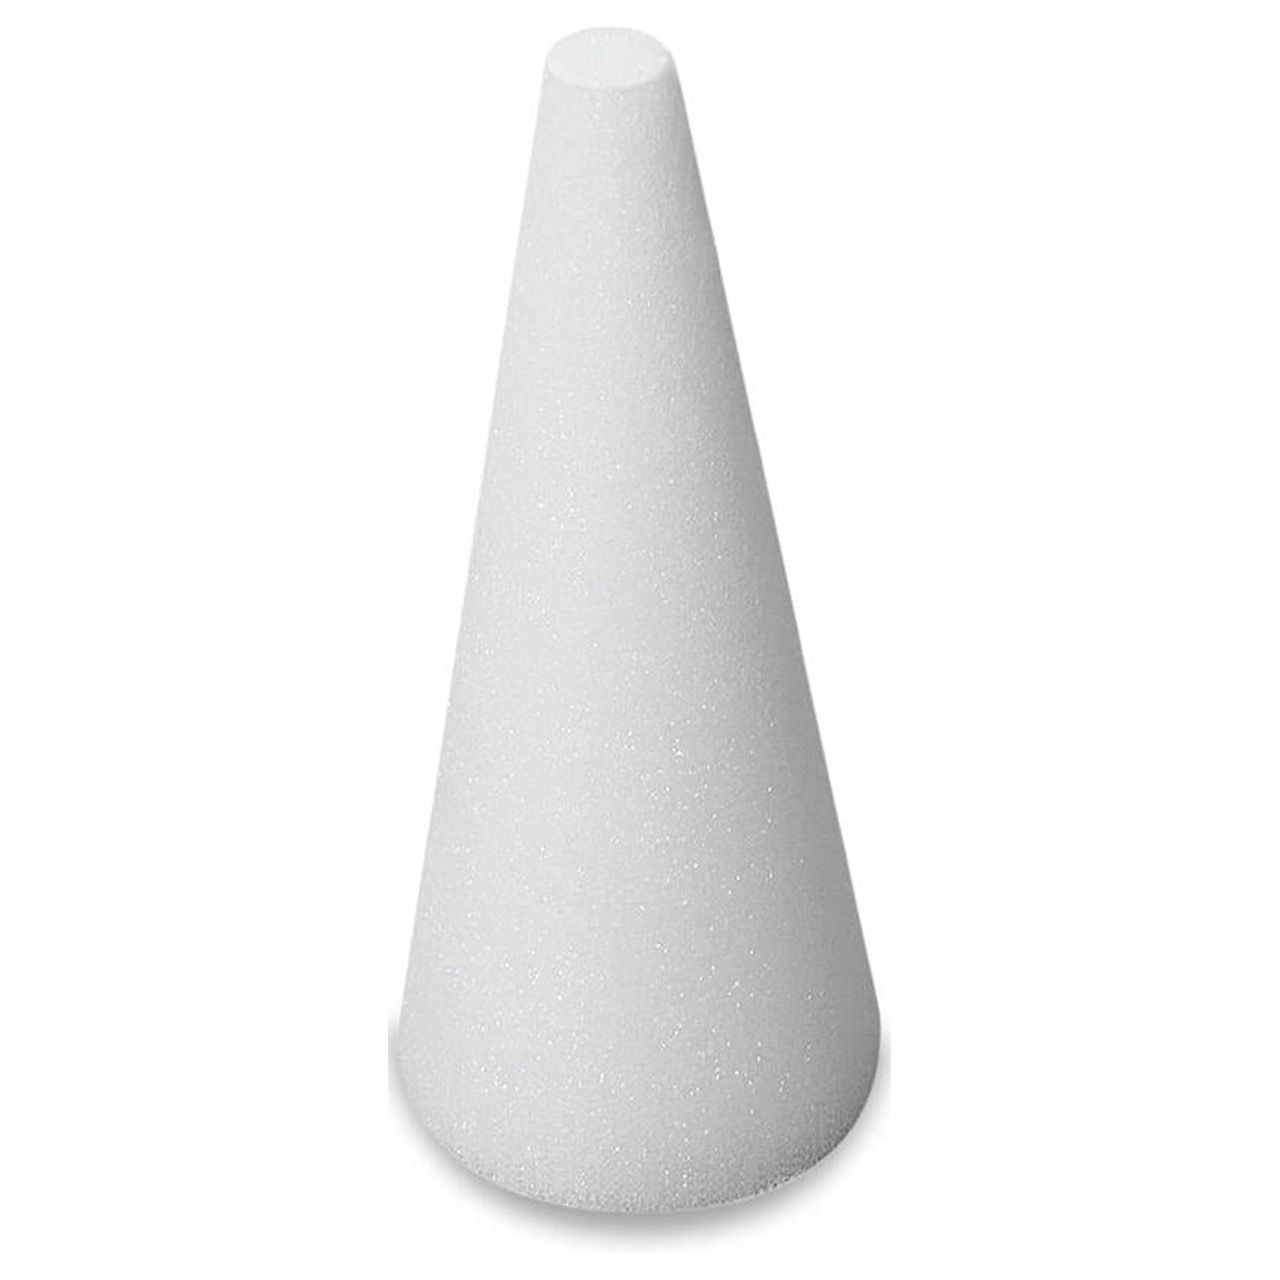 Bright Creations 12 Pack White Foam Cones for Crafts, 2.7 x 5.5 in